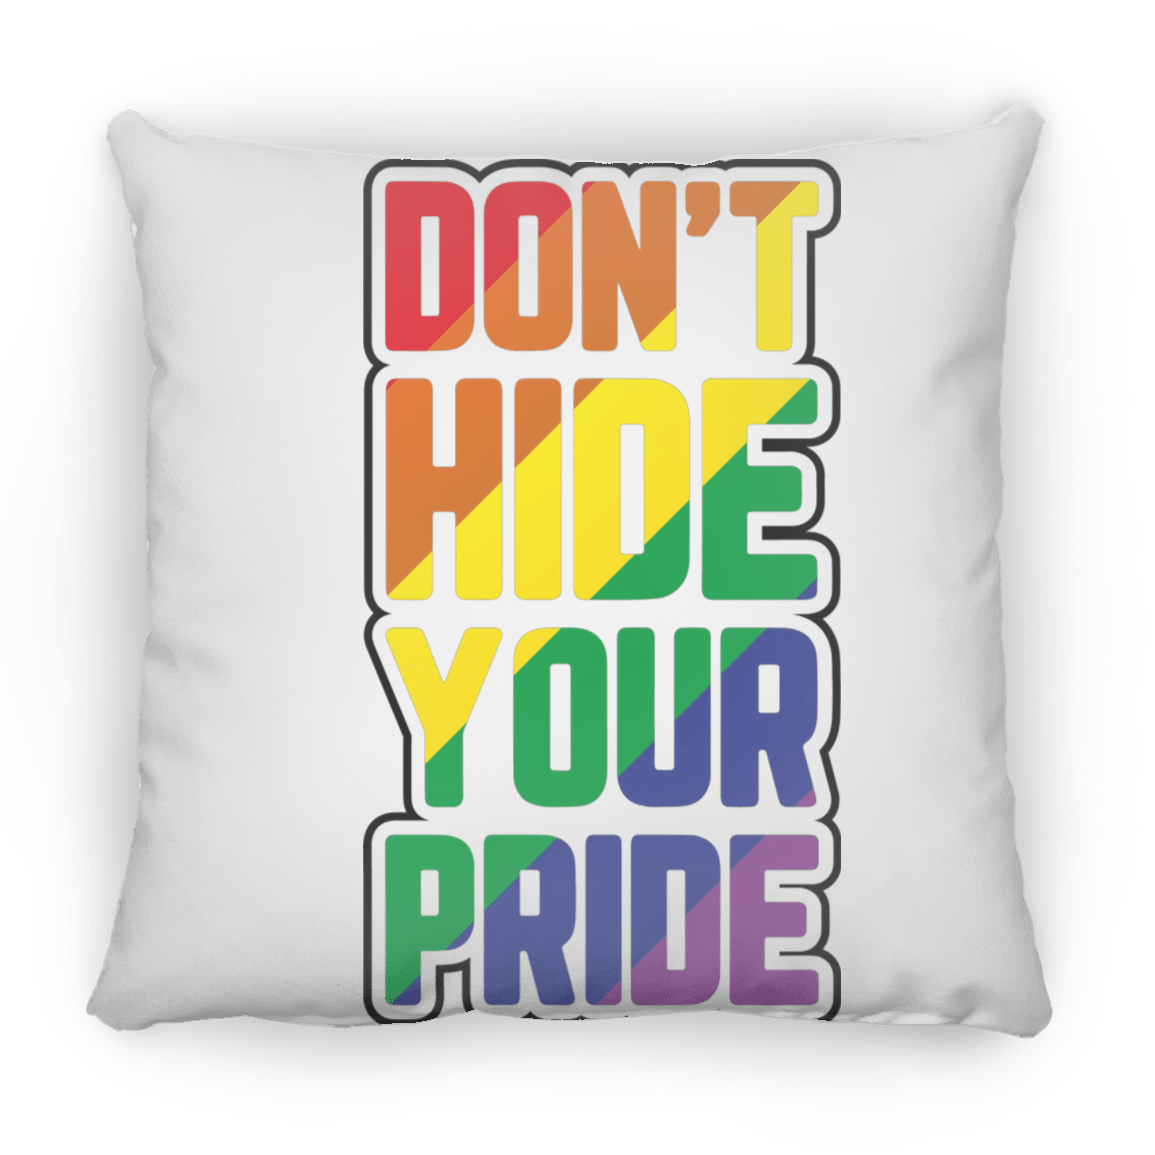 Don't Hide Your Pride Large Square Pillow